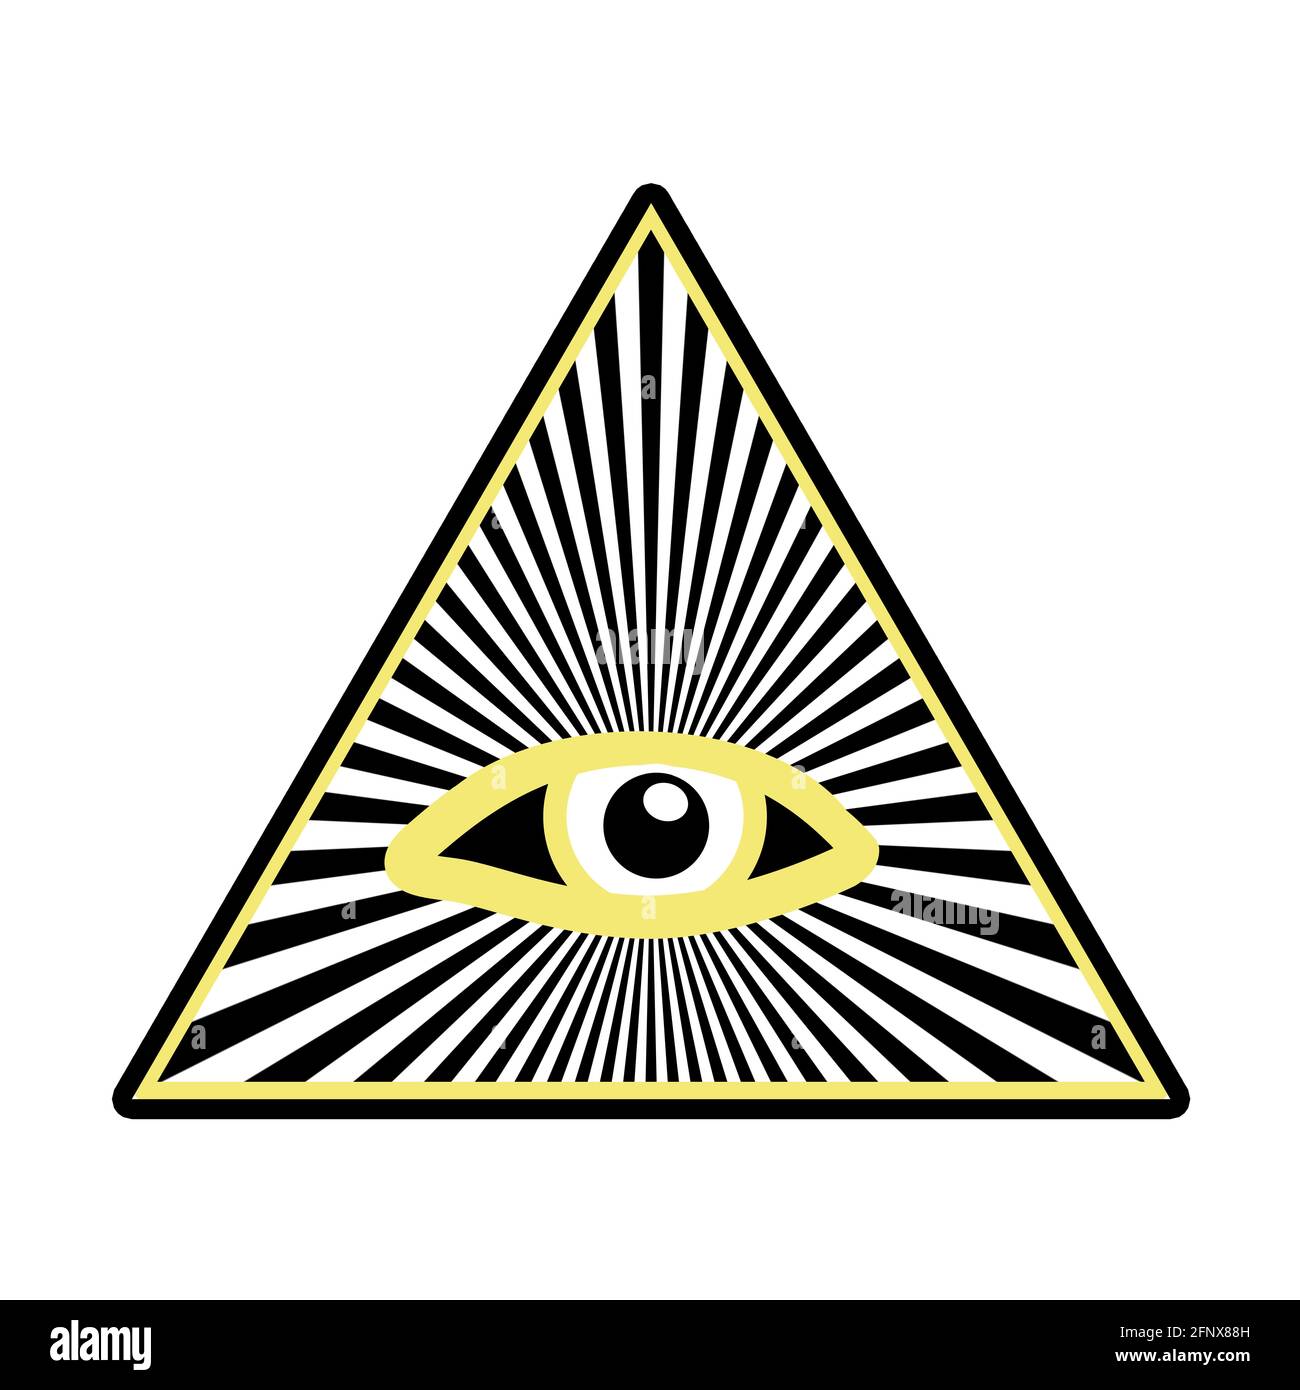 Digital illustration based on the Eye of Providence, also known as All Seeing Eye or Eye of God. Stock Photo